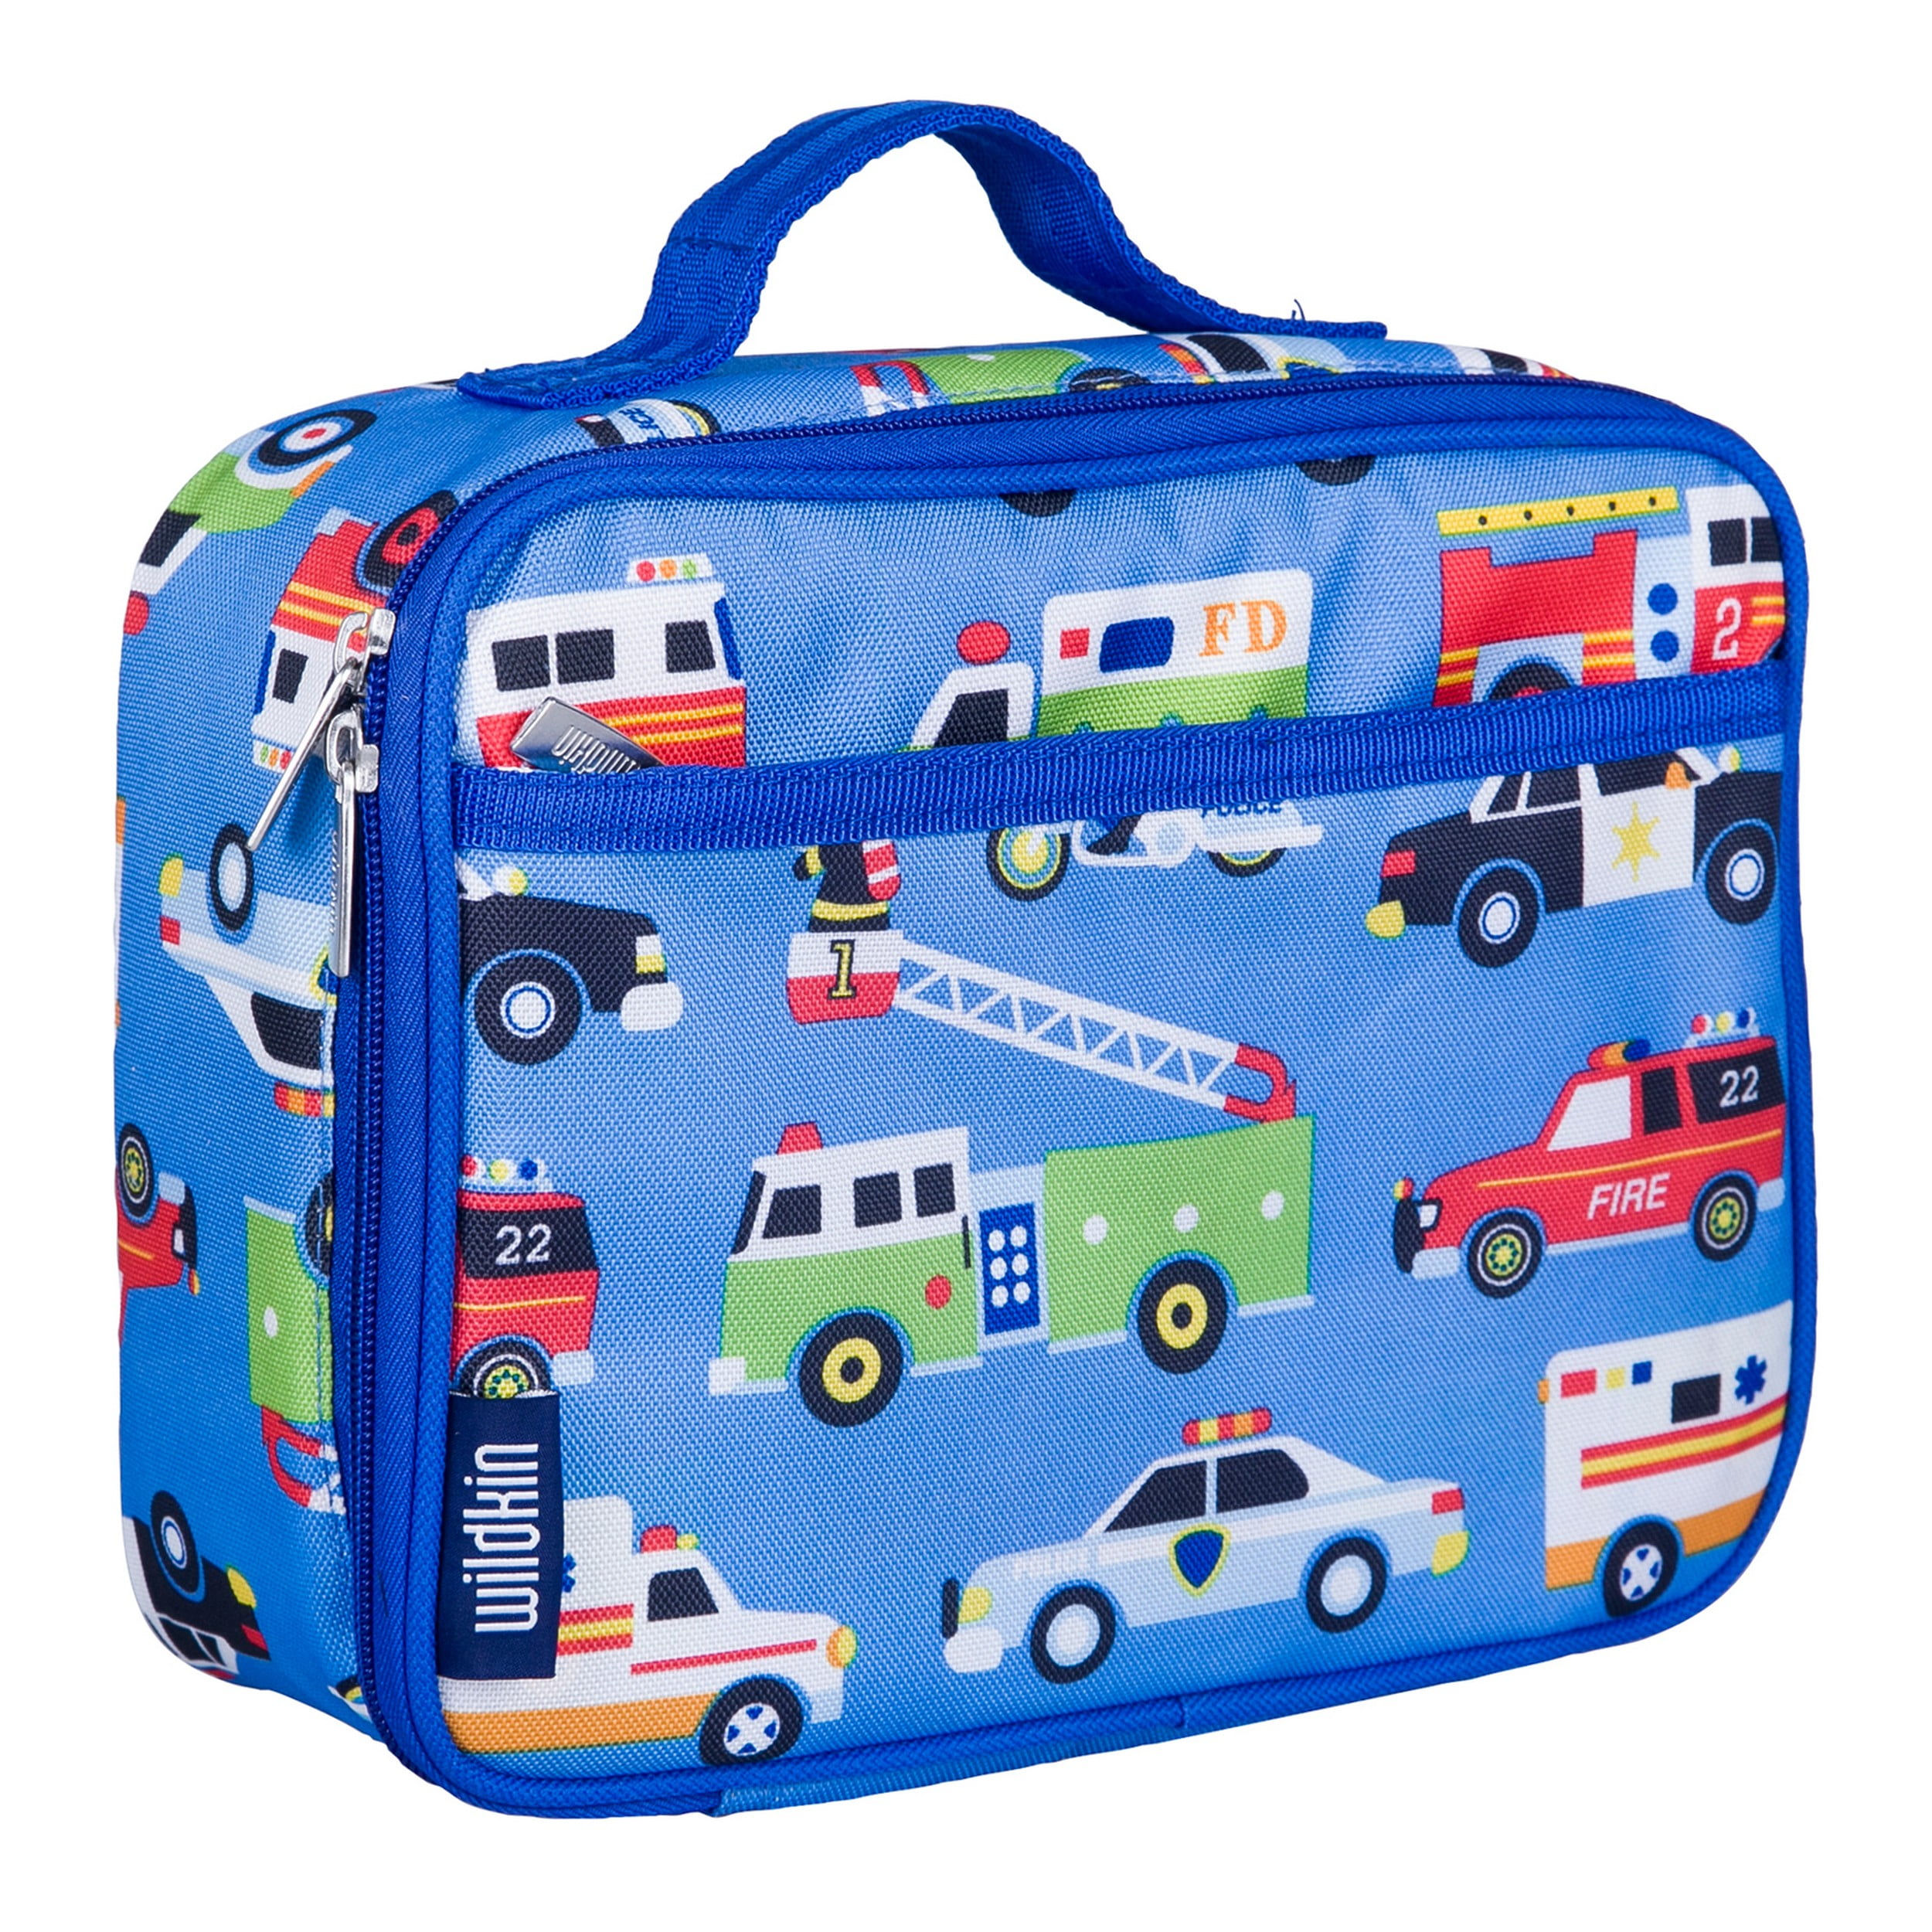 Wildkin Kids Insulated Lunch Box for Boy and Girls, BPA Free (Heroes Blue)  